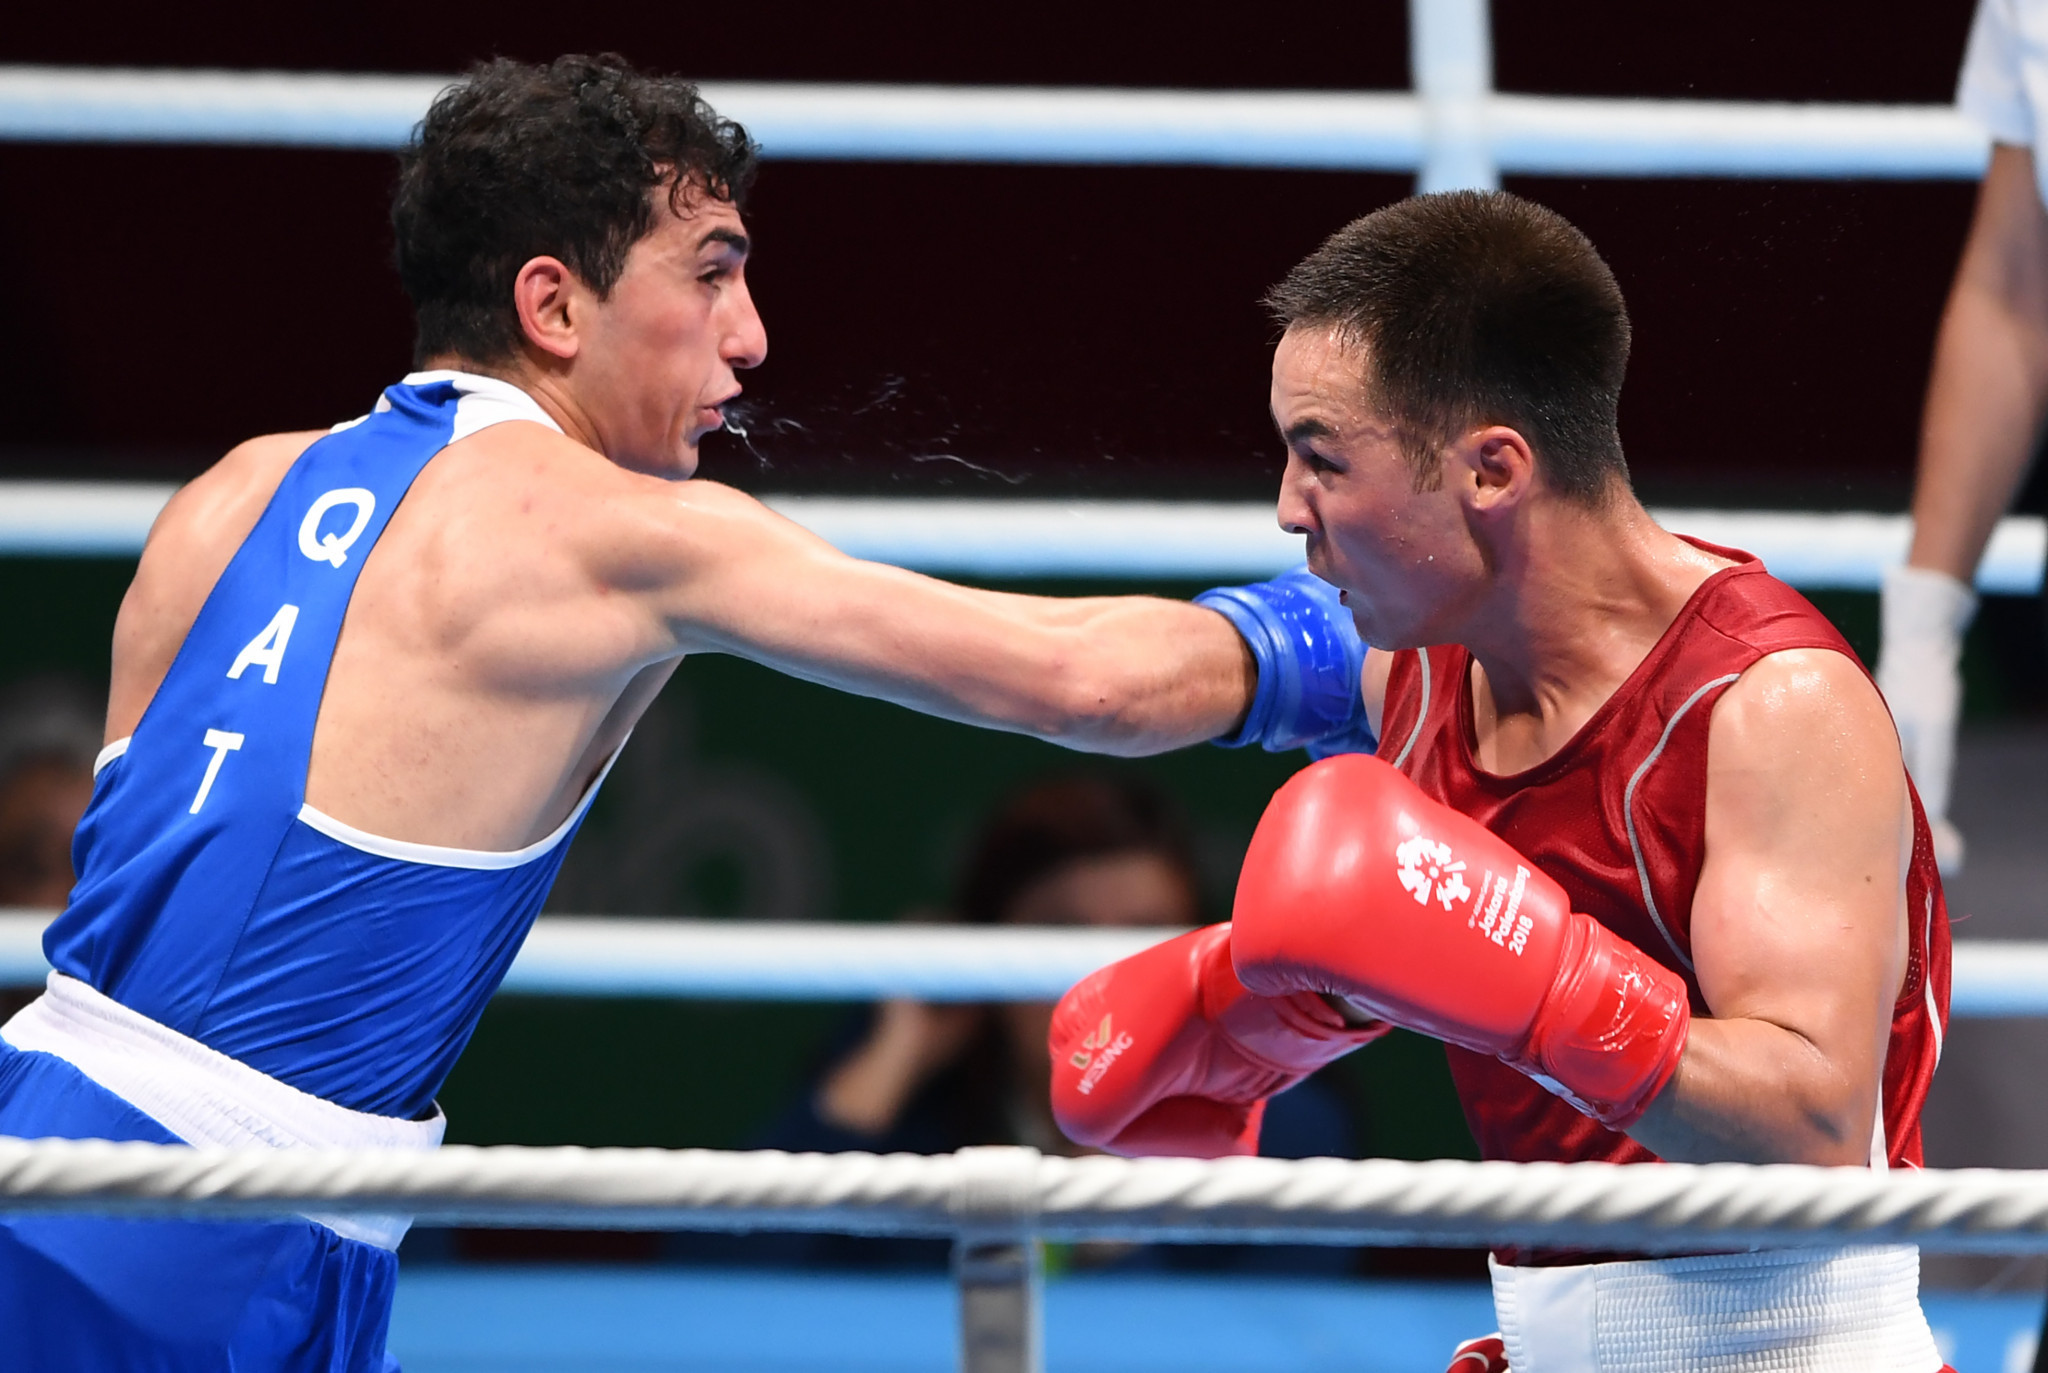 Qatar is aiming to improve its boxers in time for the 2030 Asian Games in Doha ©Getty Images